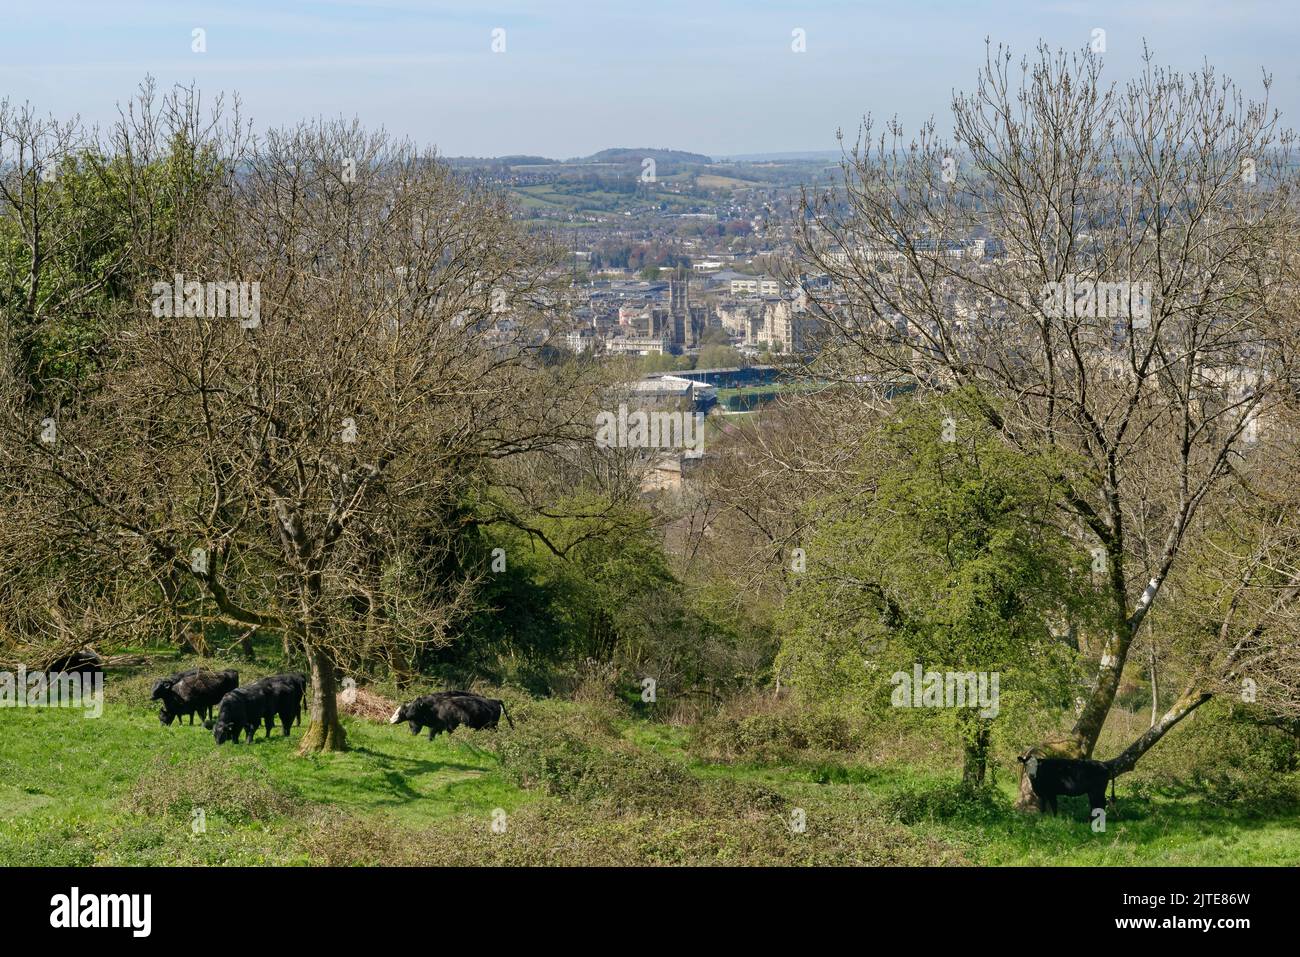 Overview of Bath City from the Bath Skyline Walk near Bathwick, with Cattle (Bos taurus) in the foreground, Bath and northeast Somerset, UK, April Stock Photo